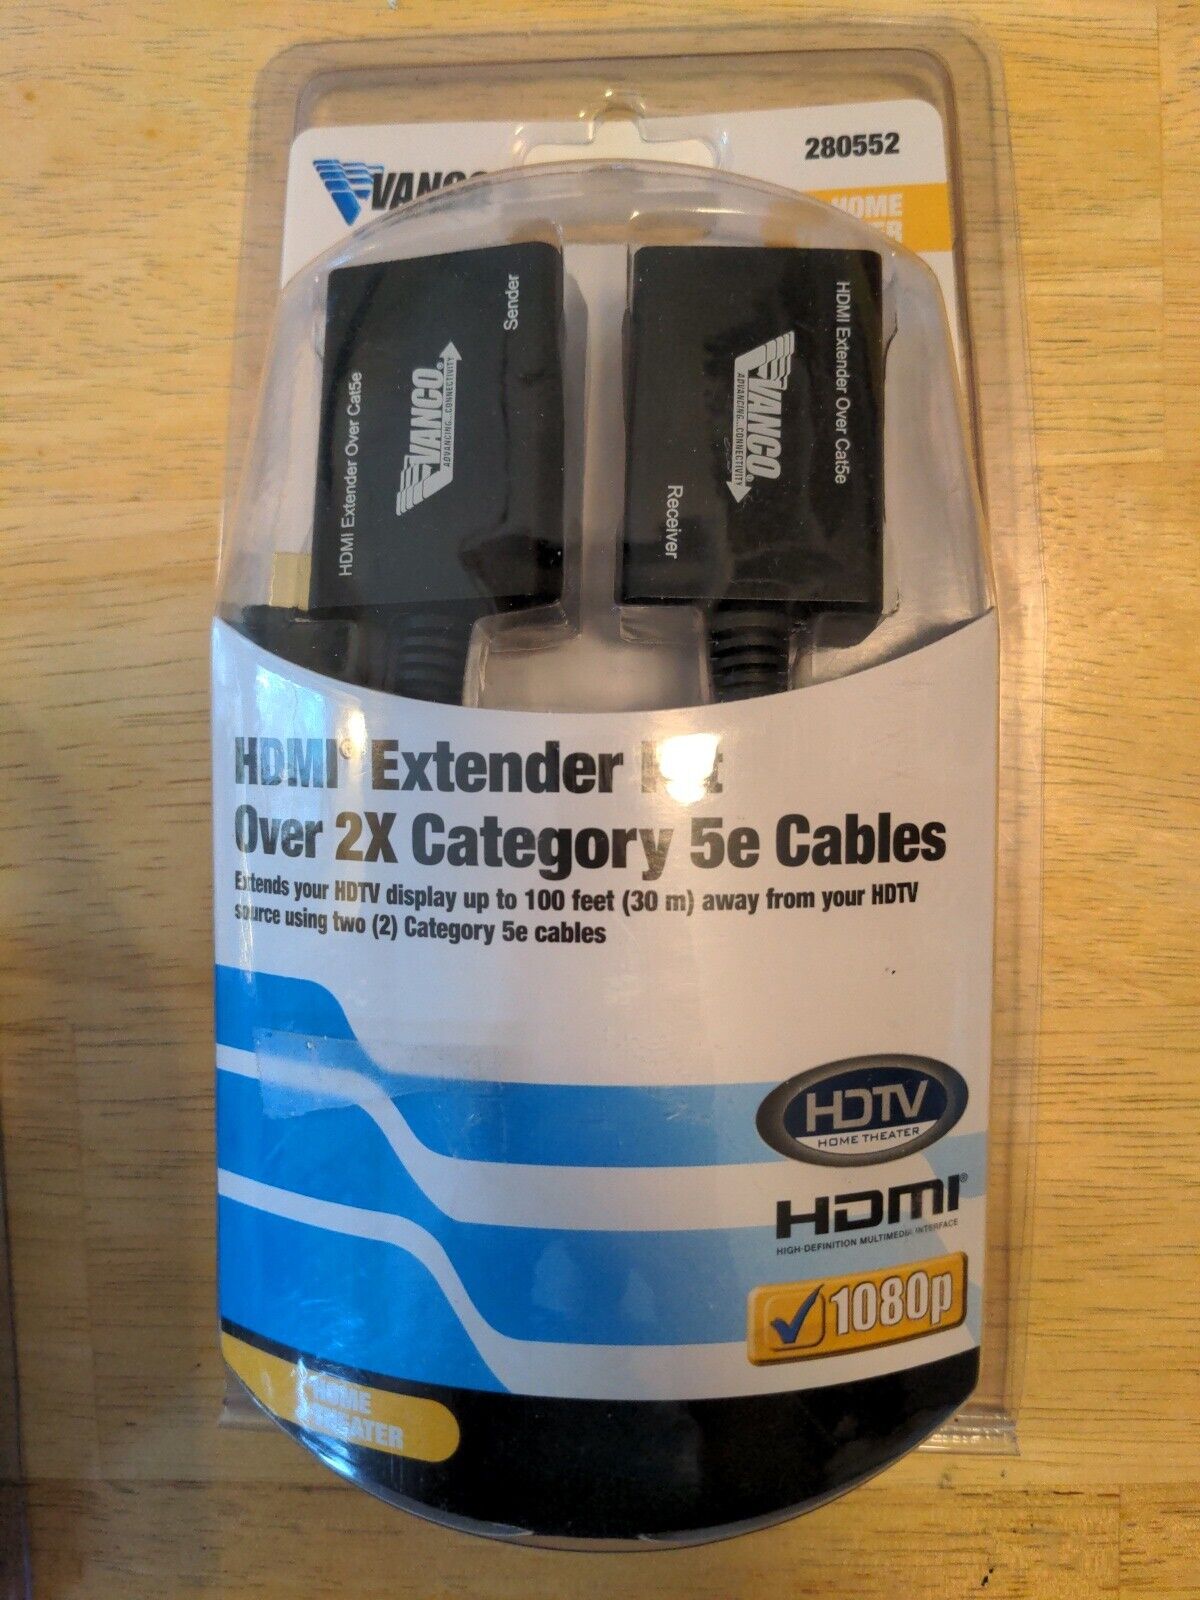 Vanco HDMI Extender Kit Over 2X Category 5e Cables NEW IN PACKAGE Part # 280552